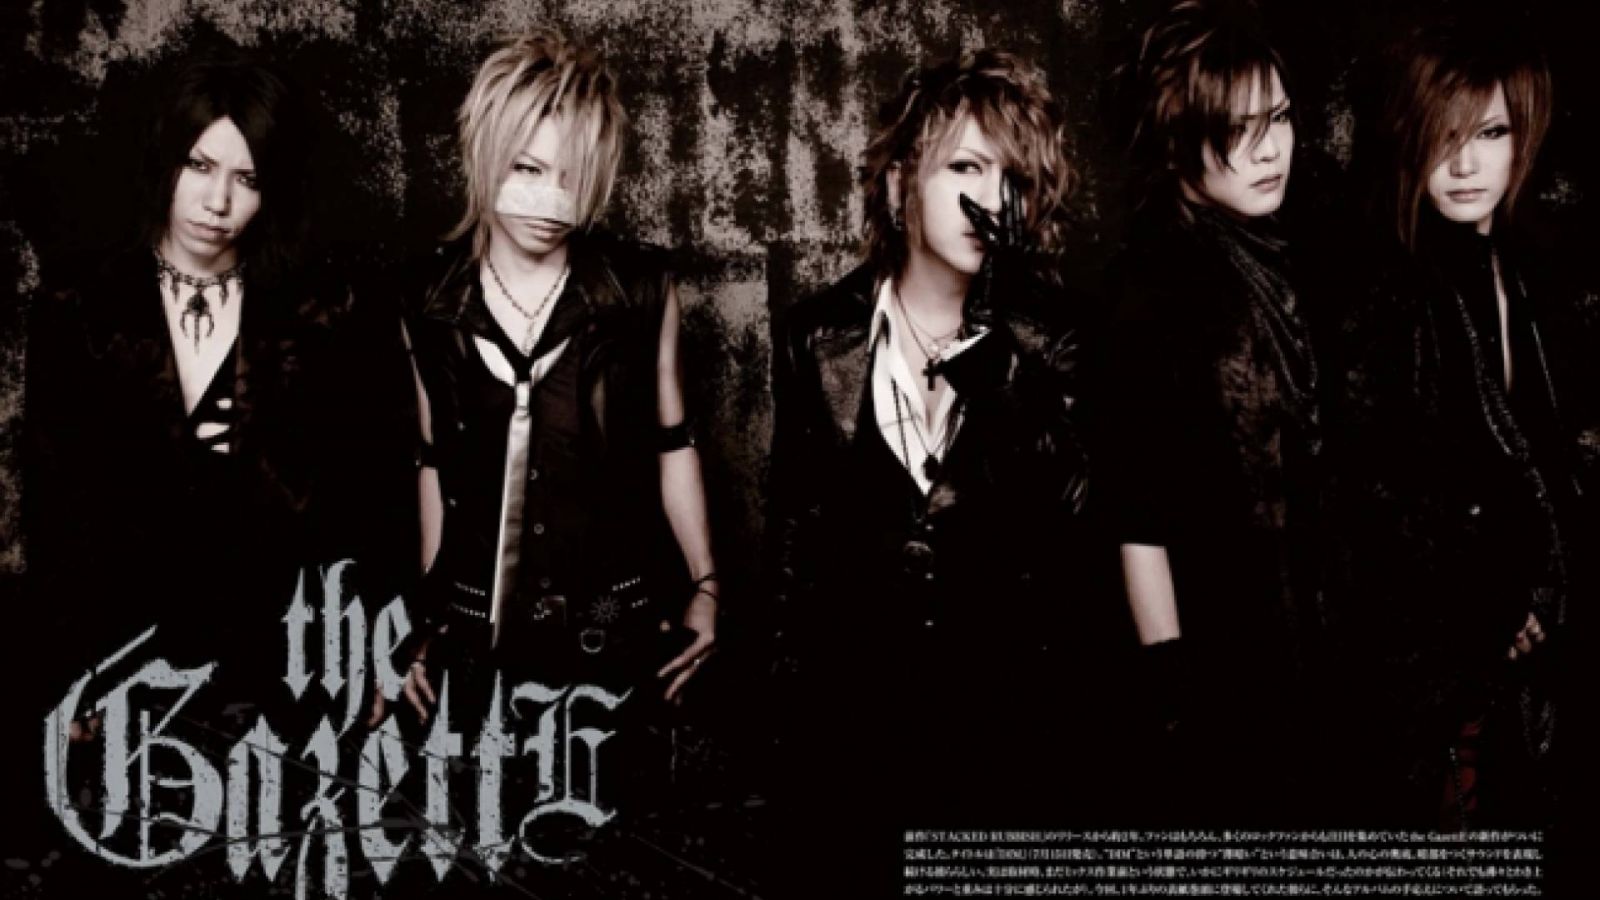 Zy 47: the GazettE © 2009 Zy.connection Inc. All Rights Reserved.